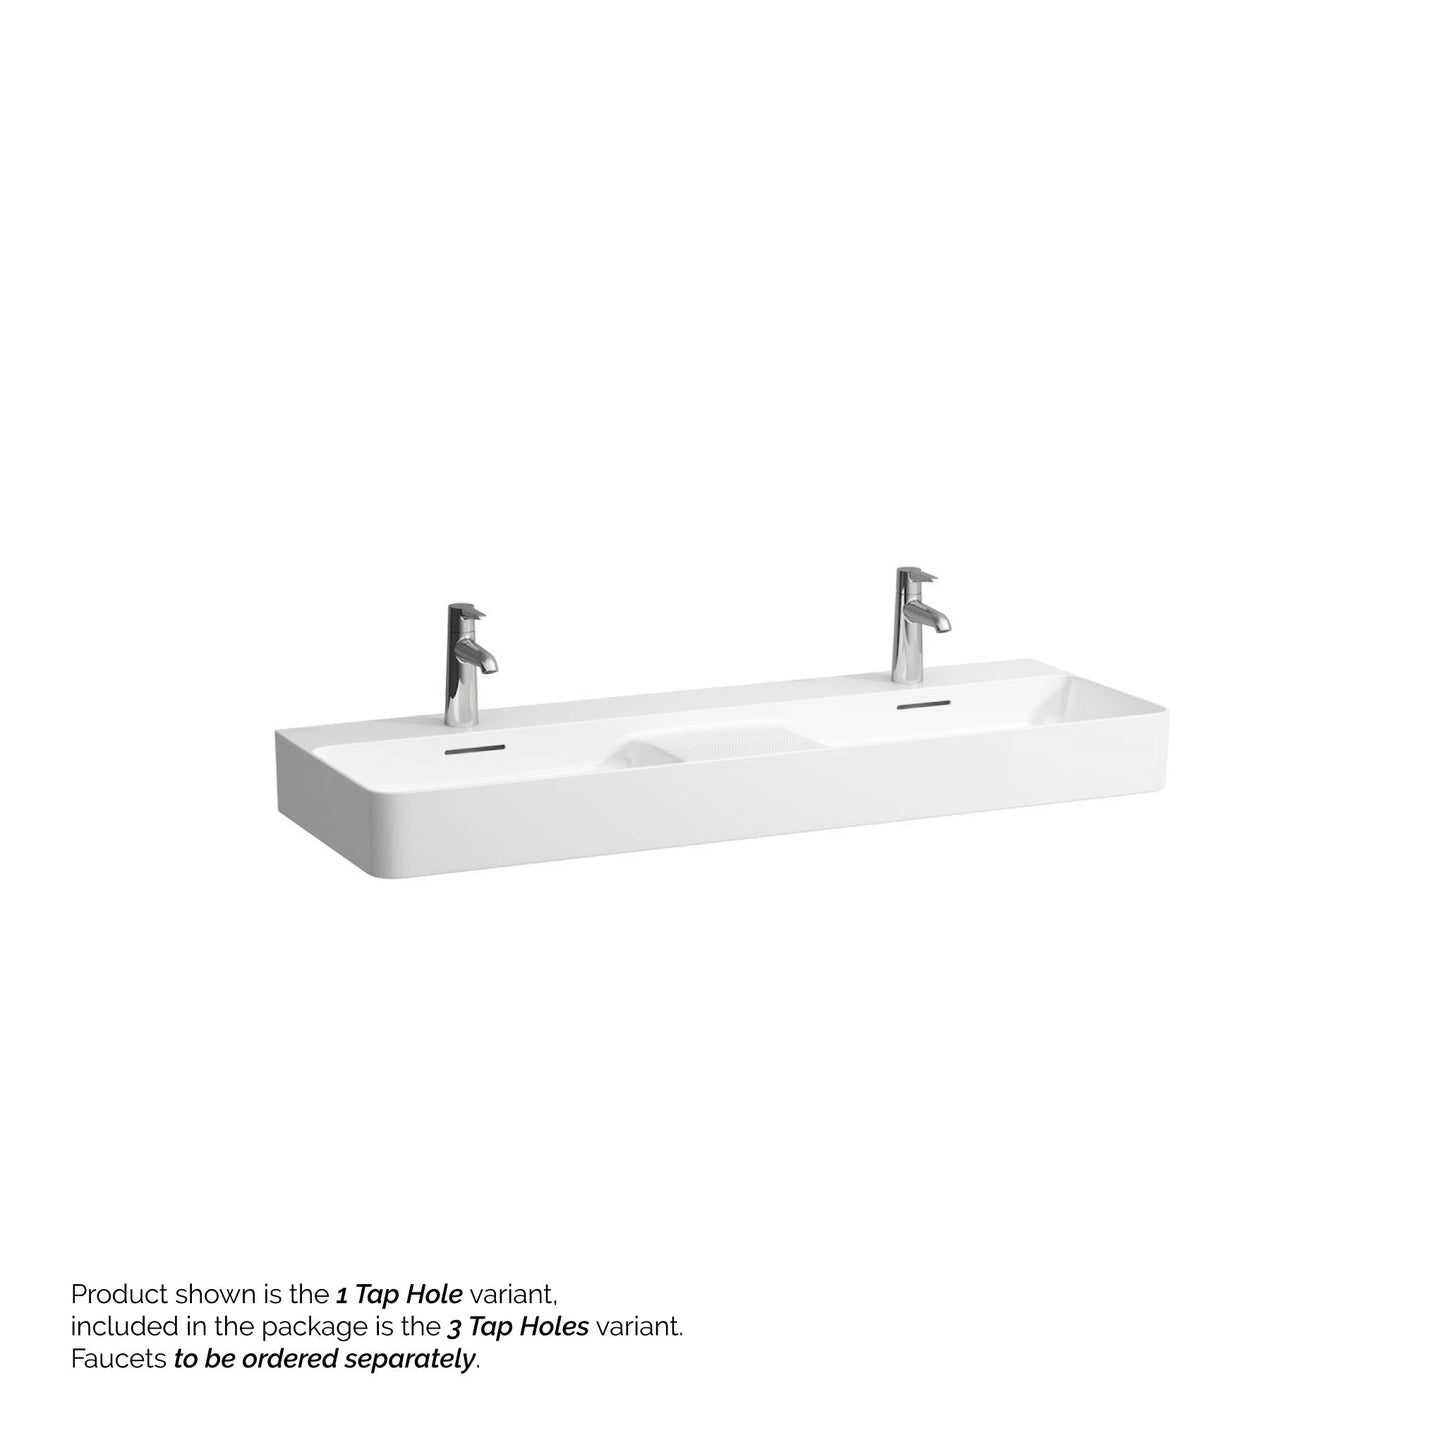 Laufen Val 47" x 17" Matte White Ceramic Wall-Mounted Double Bathroom Sink With 6 Faucet Holes